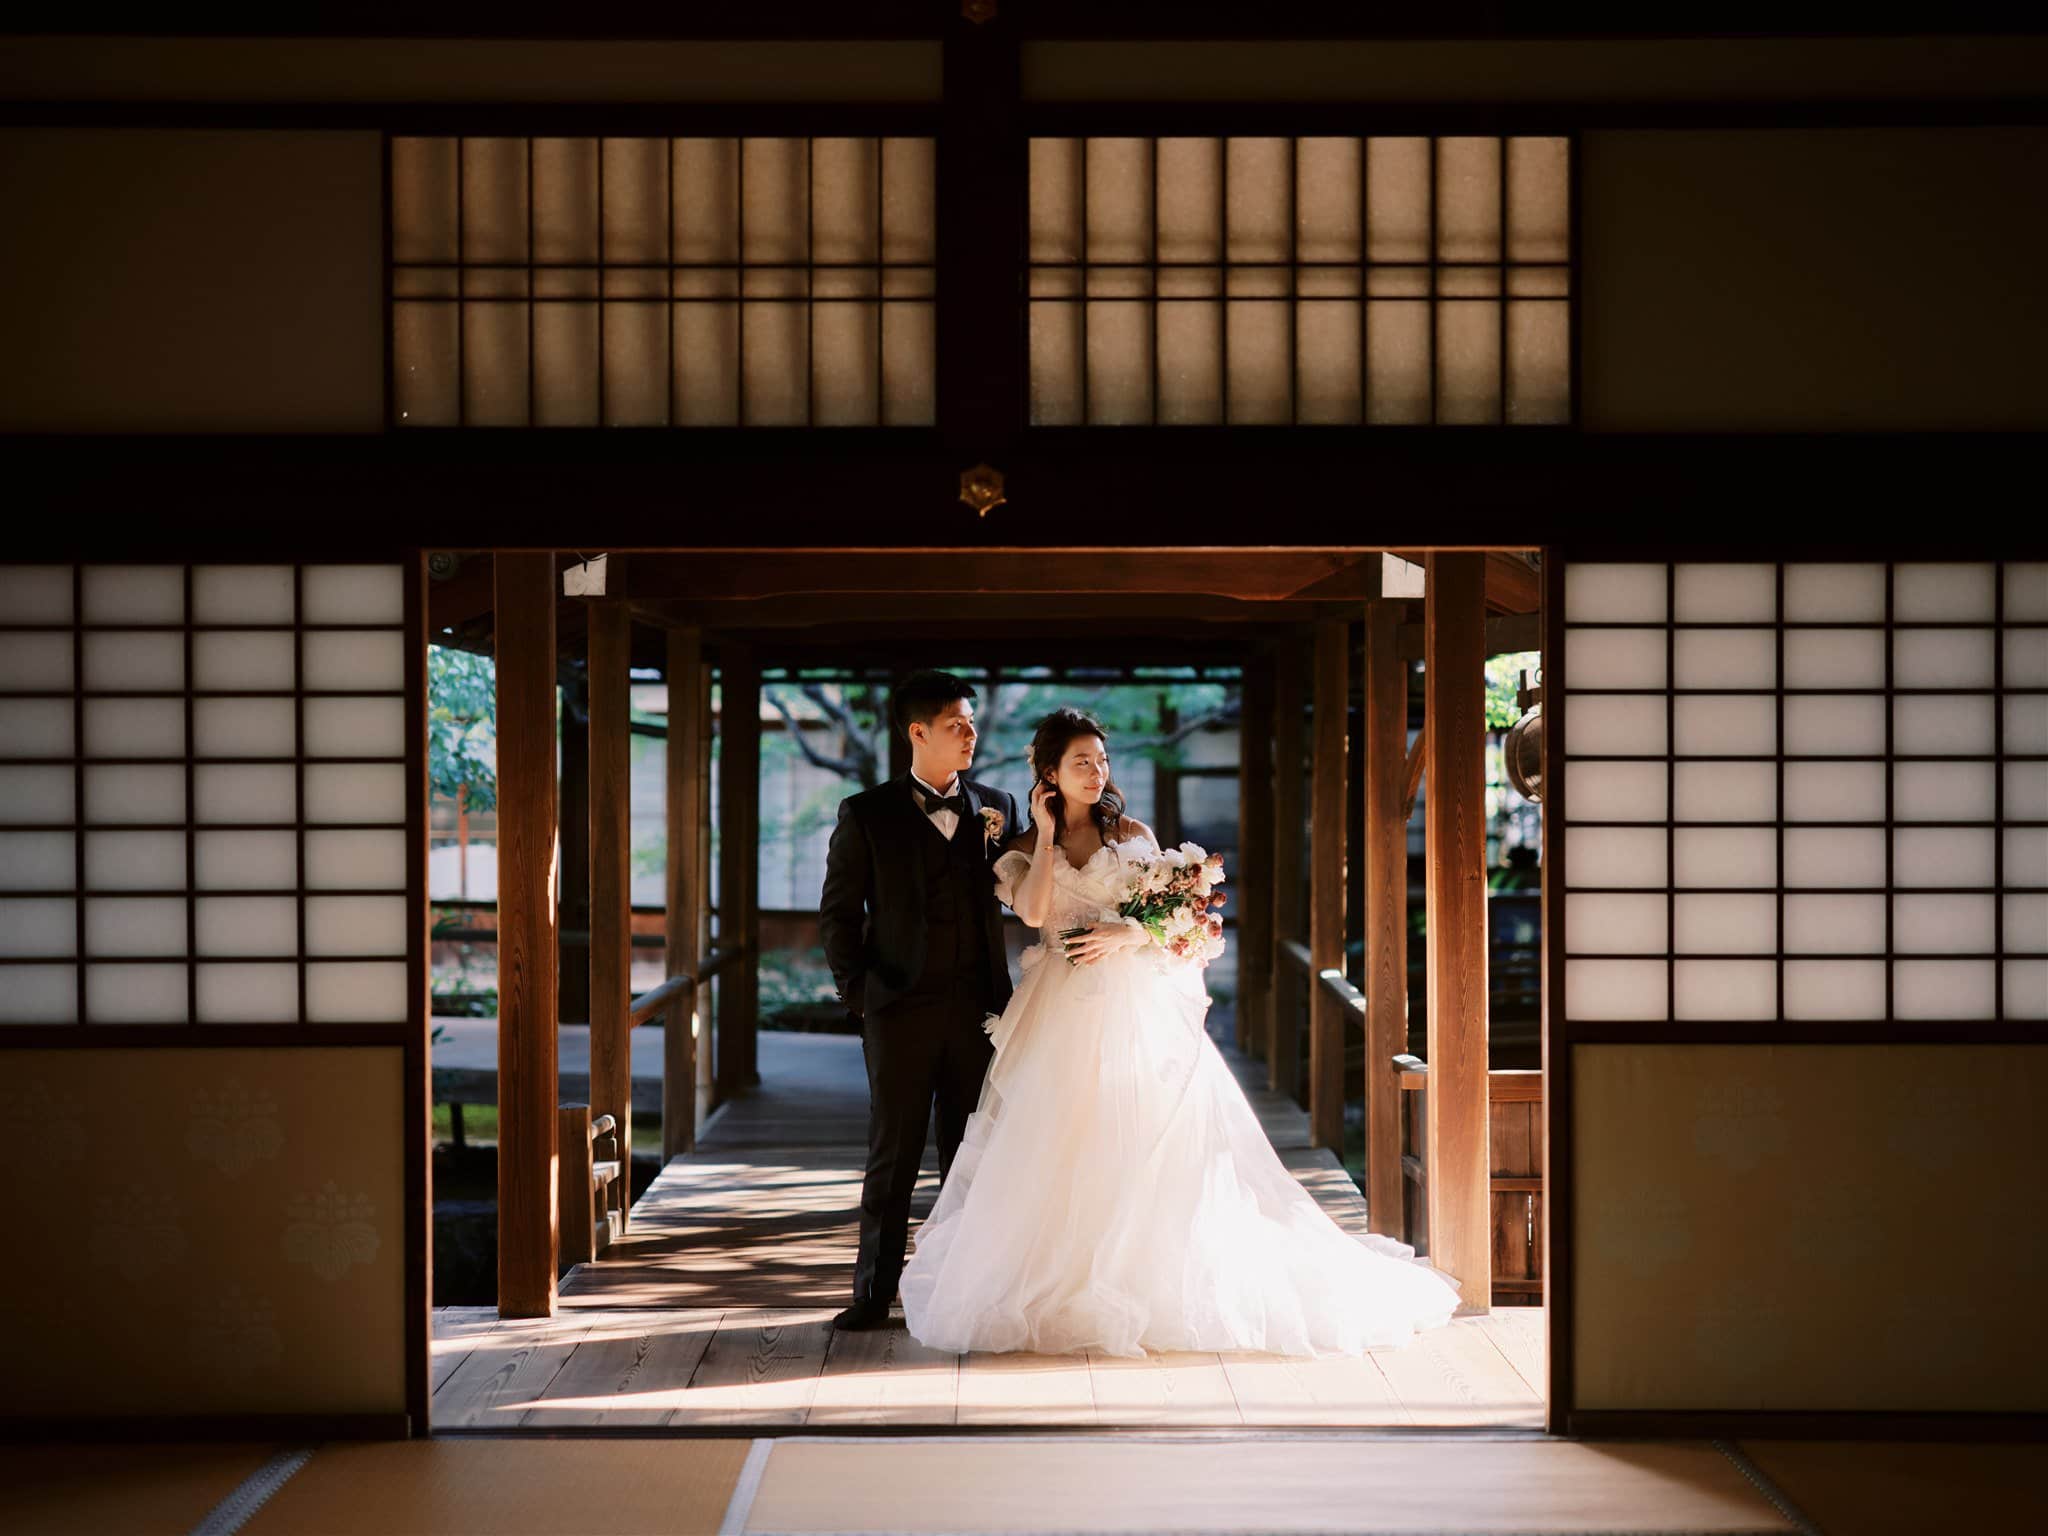 Kyoto Tokyo Japan Elopement Wedding Photographer, Planner & Videographer | A bride and groom elegantly standing in the doorway of a traditional Japanese house, captured beautifully by a talented Japan elopement photographer.